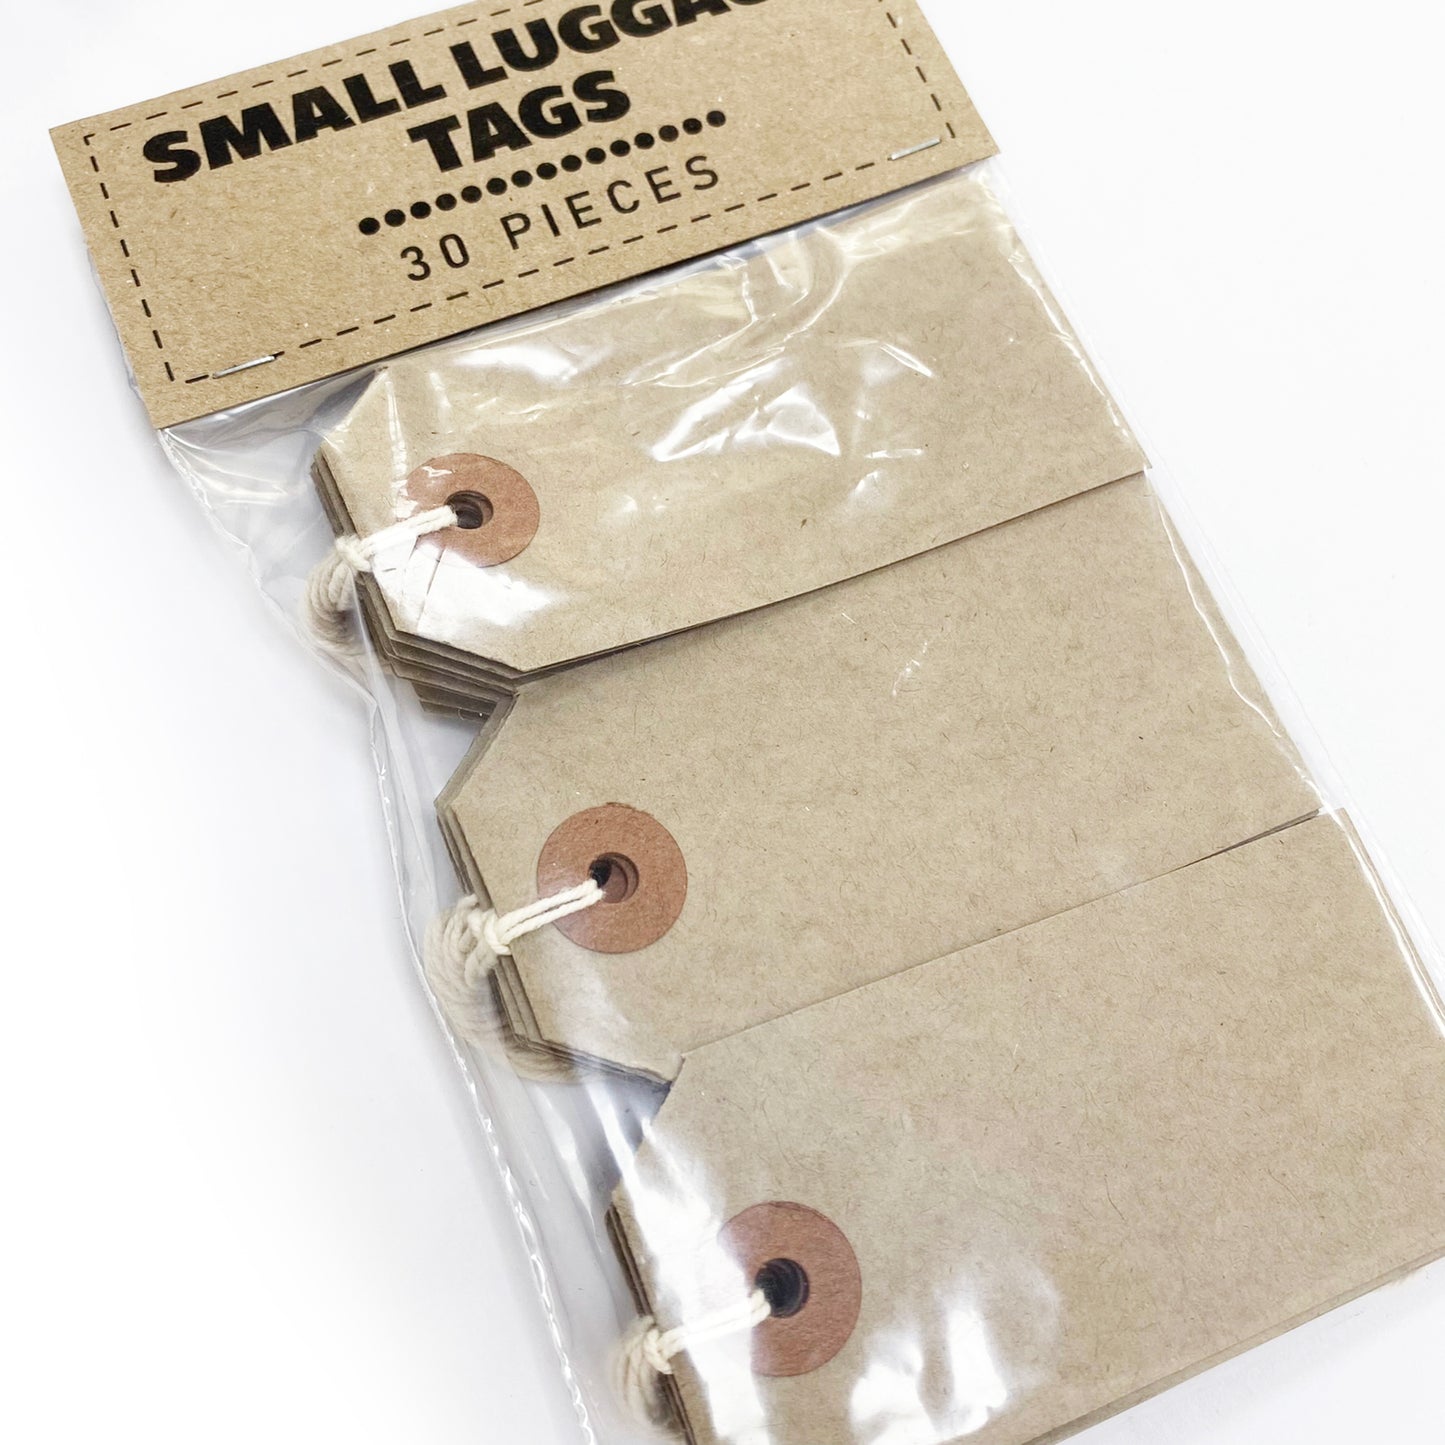 Brown Kraft Card Rustic Luggage Tags | 30 Vintage-Inspired Recycled Tag | 82mm x 41mm | Reinforced Ring Tag With String - SweetpeaStore